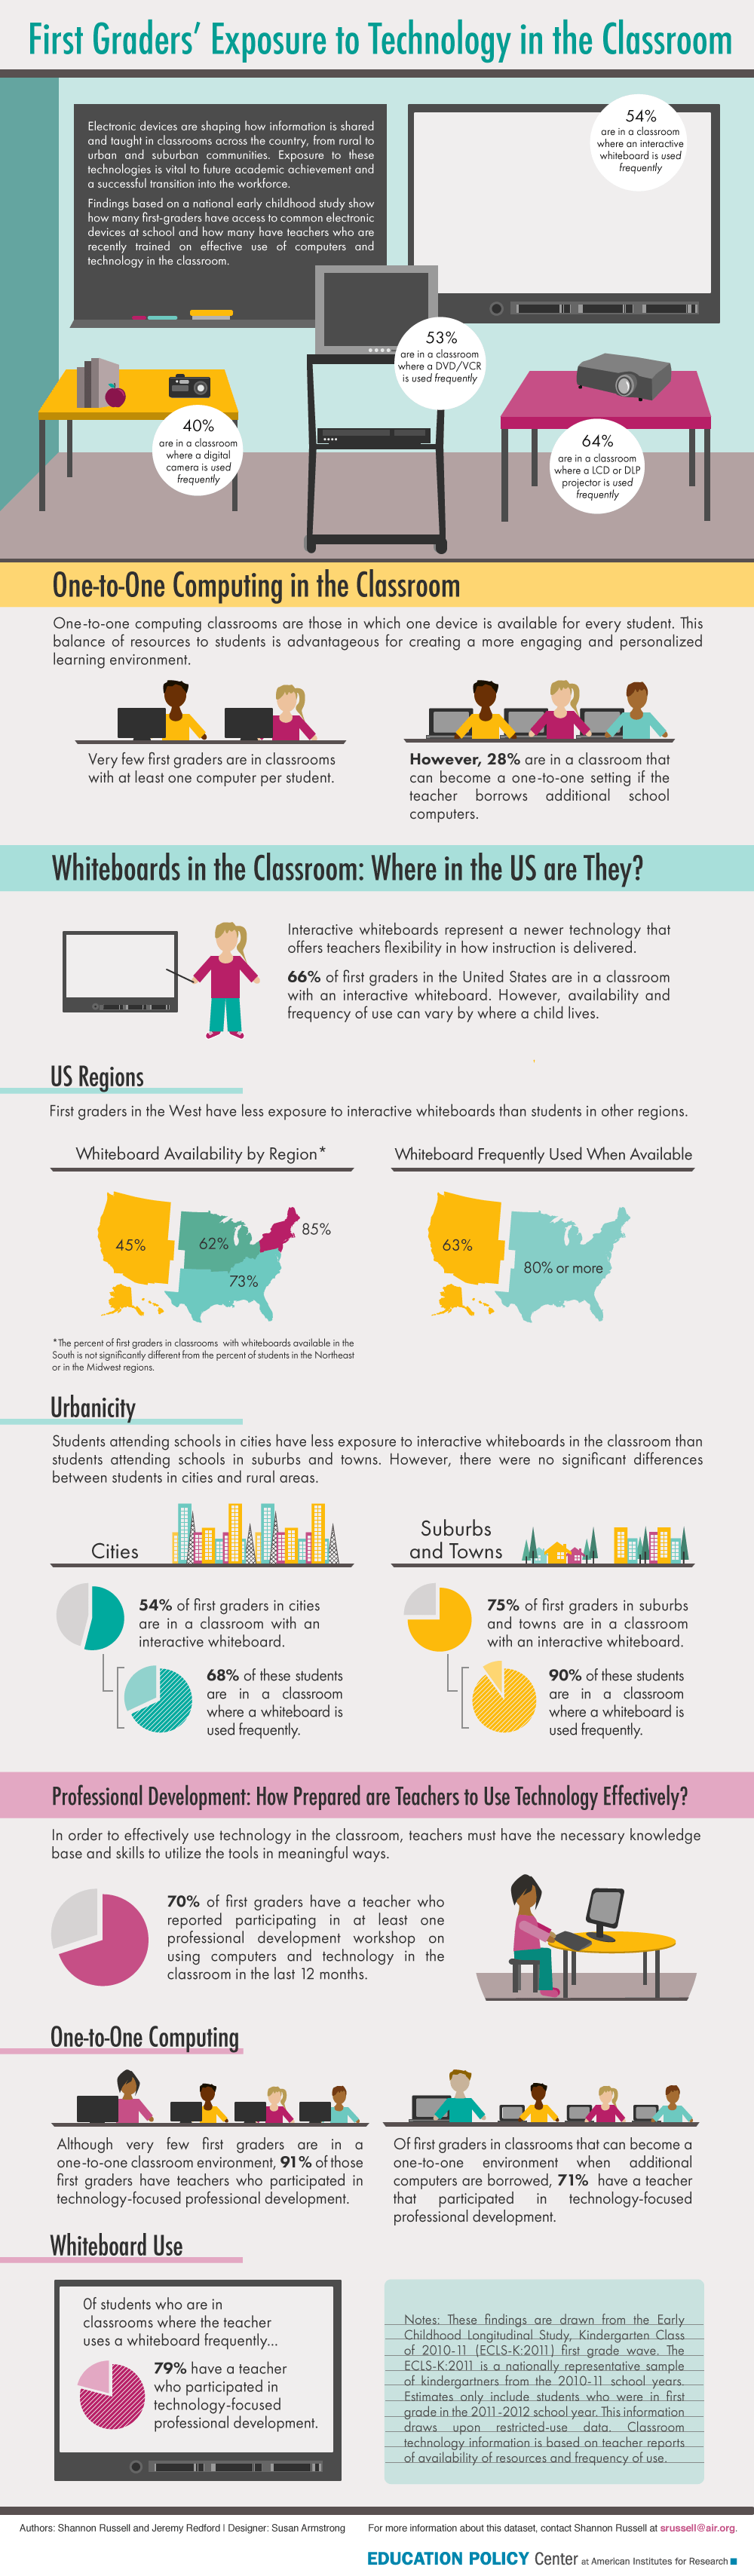 First Graders' Exposure to Technology in the Classroom Infographic